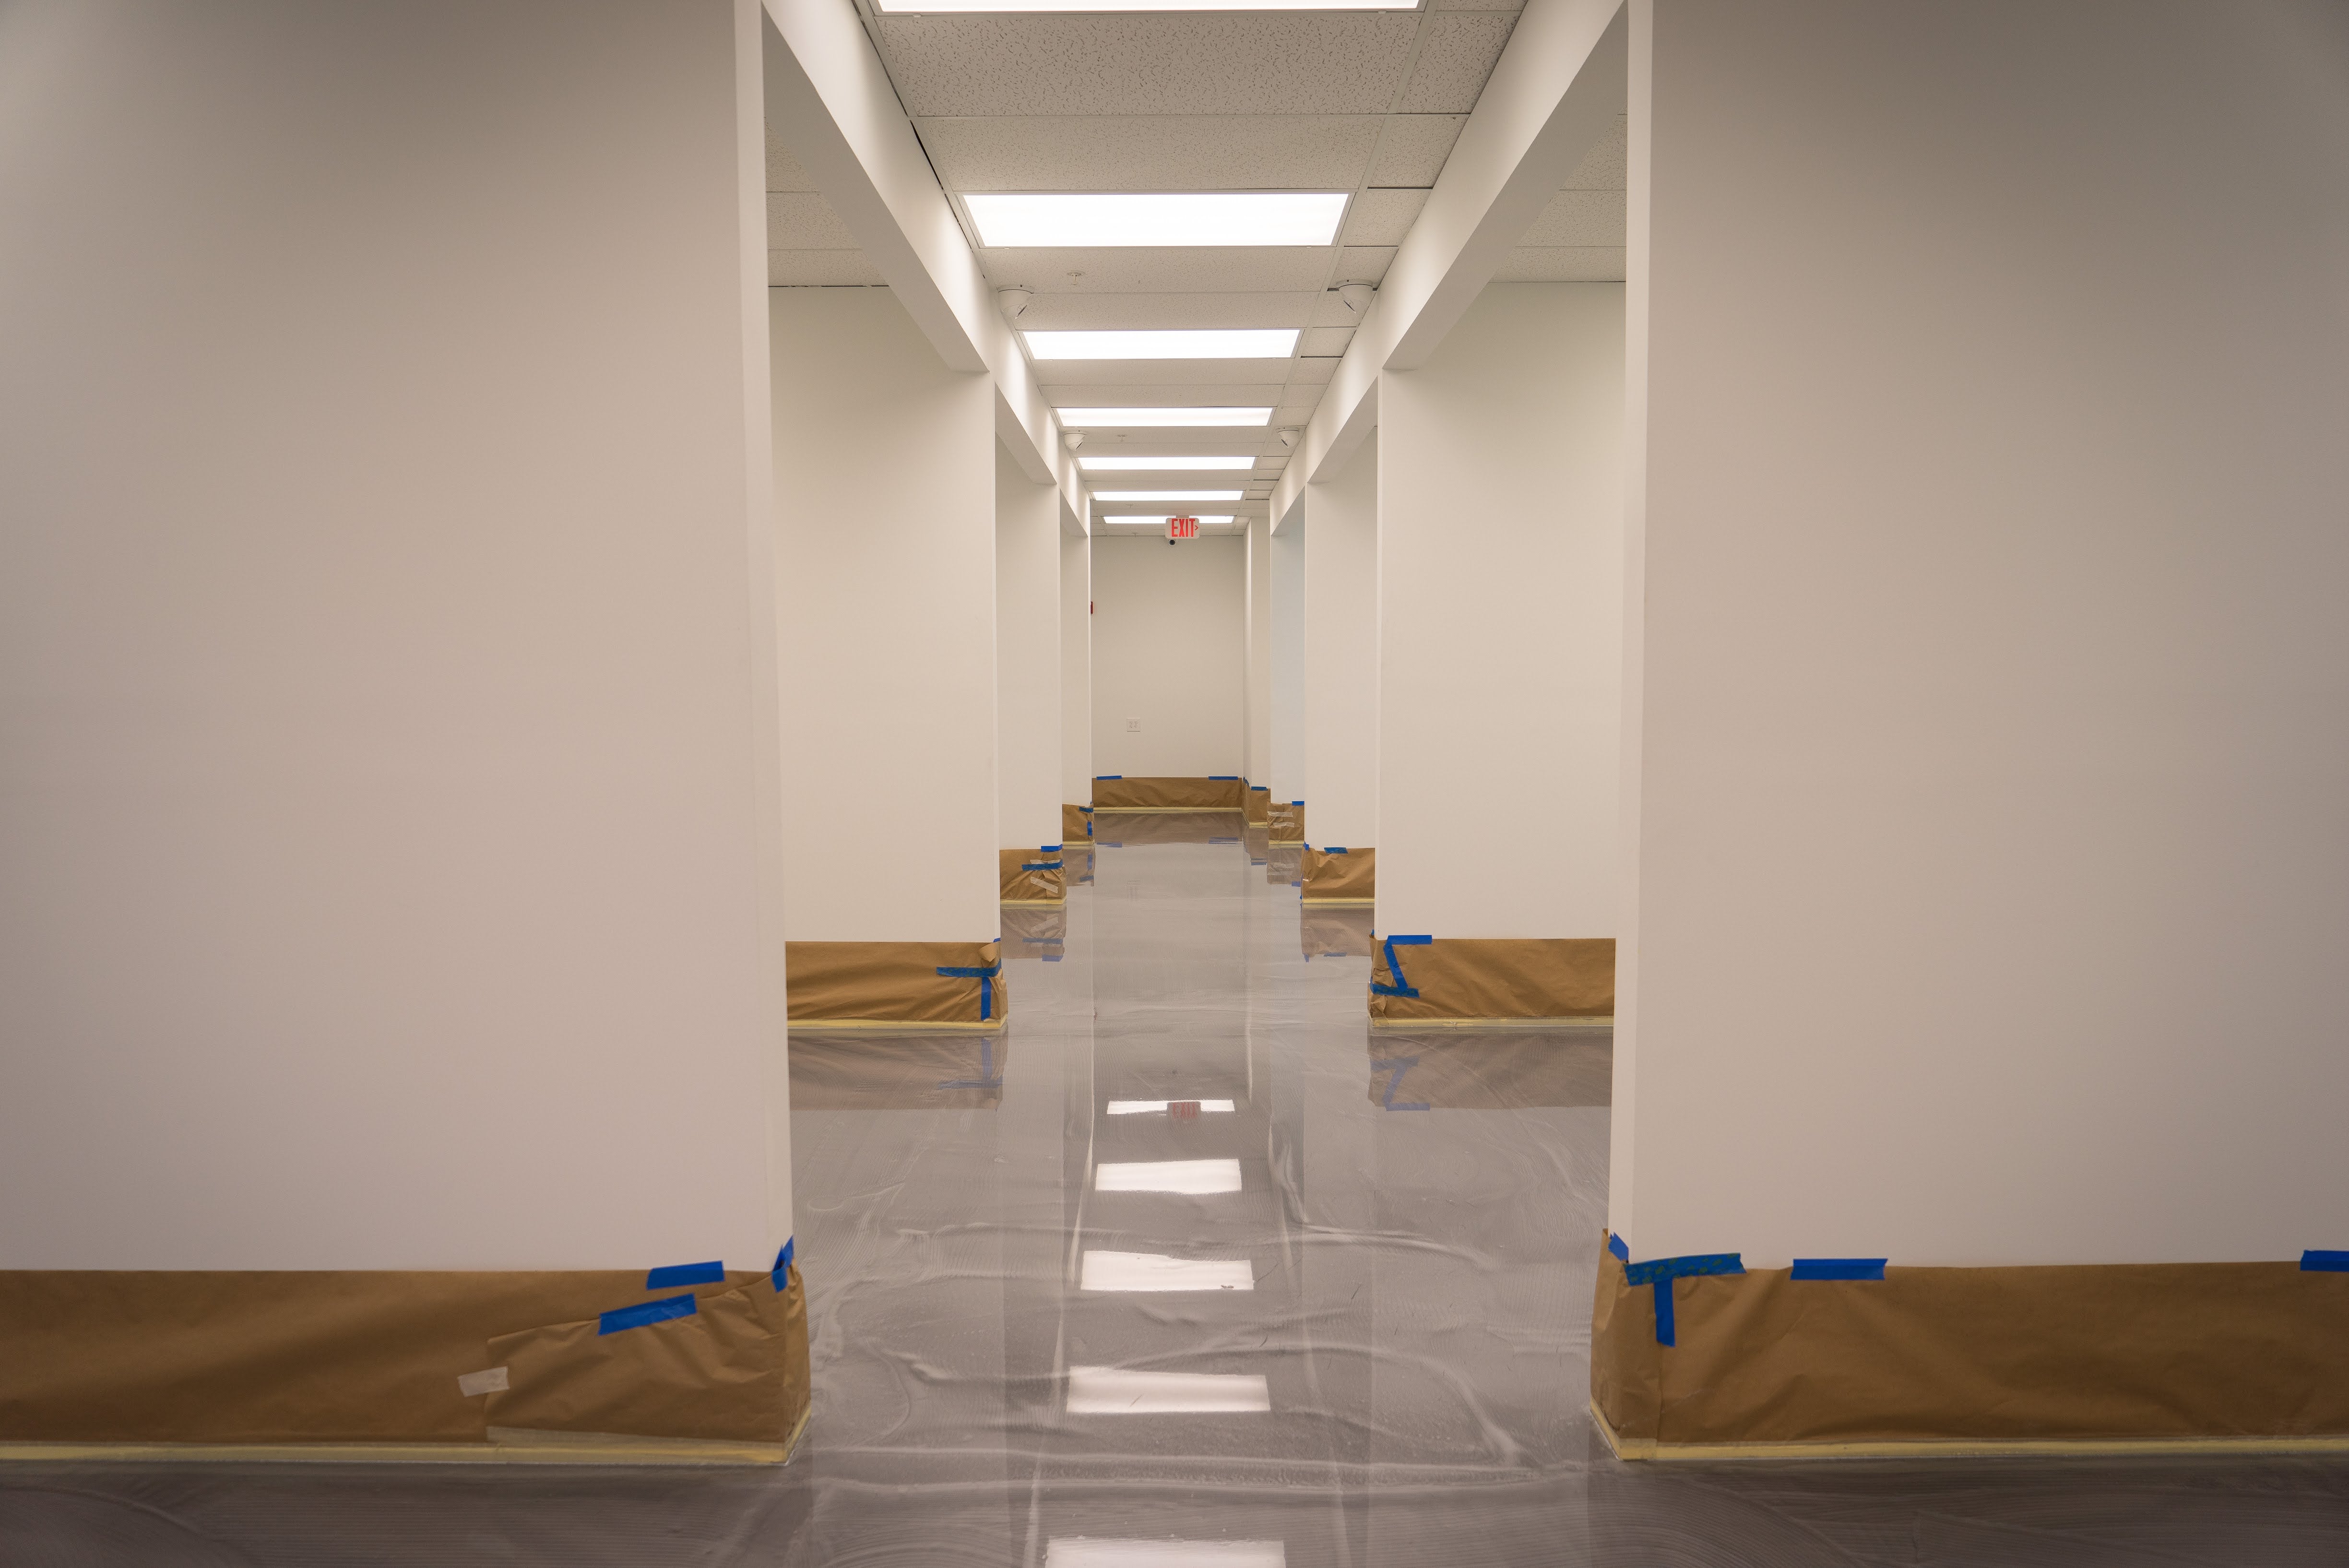 What is the Cost of Polyurethane Resin Flooring?